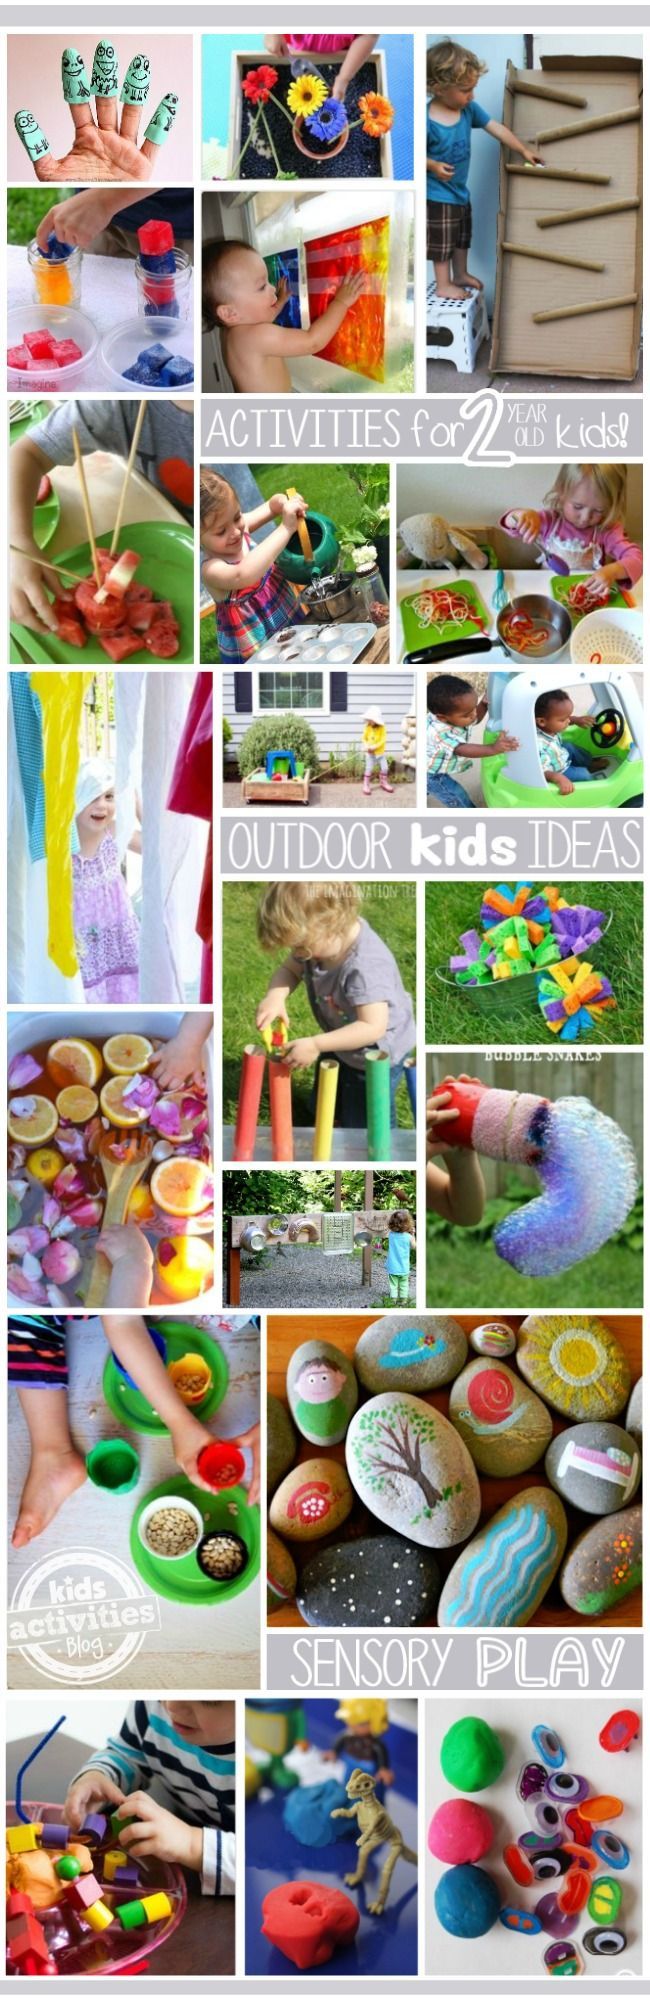 Over 80 ideas for 2 year olds!  Sensory, rainbow, outdoor, and paint are just some of the categories filled with toddler